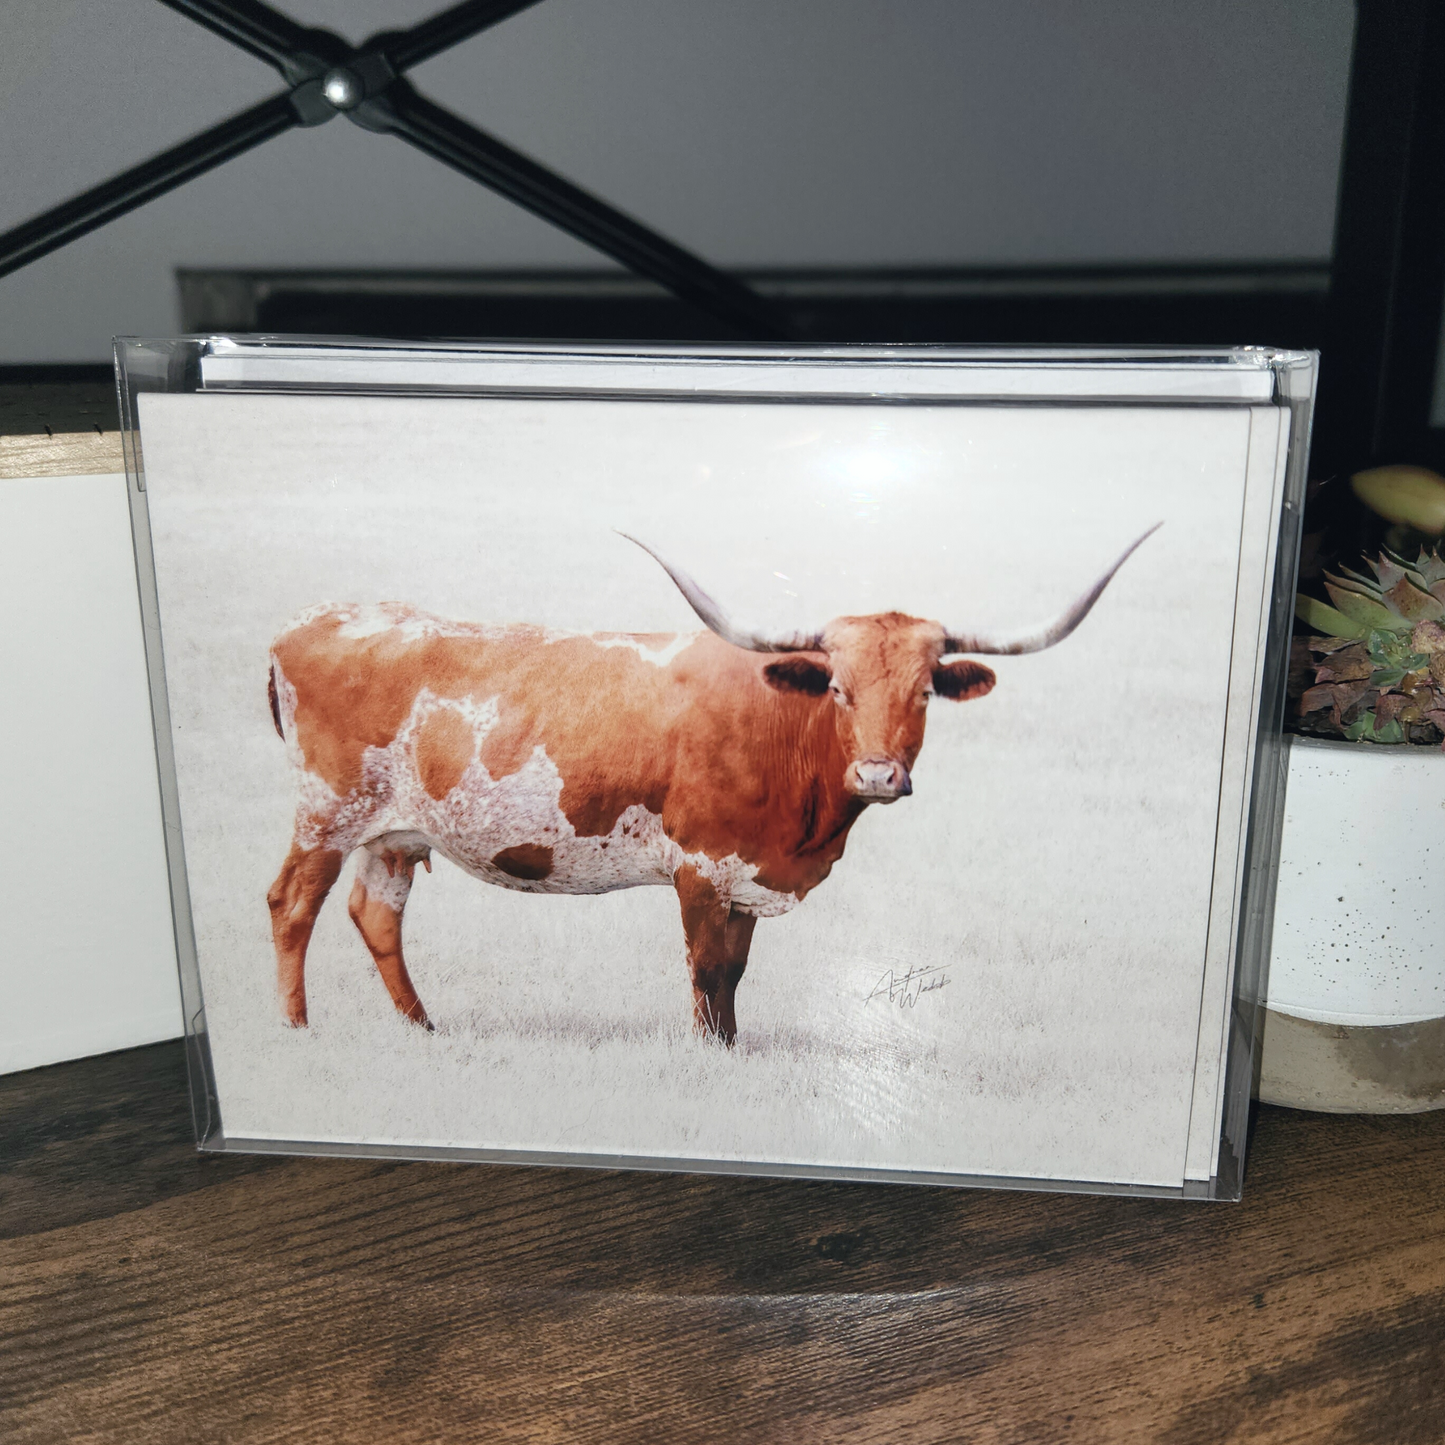 This product is a longhorn heifer cow on a folded notecard greeting card and is a set of 10. This Longhorn heifer is printed on 14 pt. cardstock matte paper.